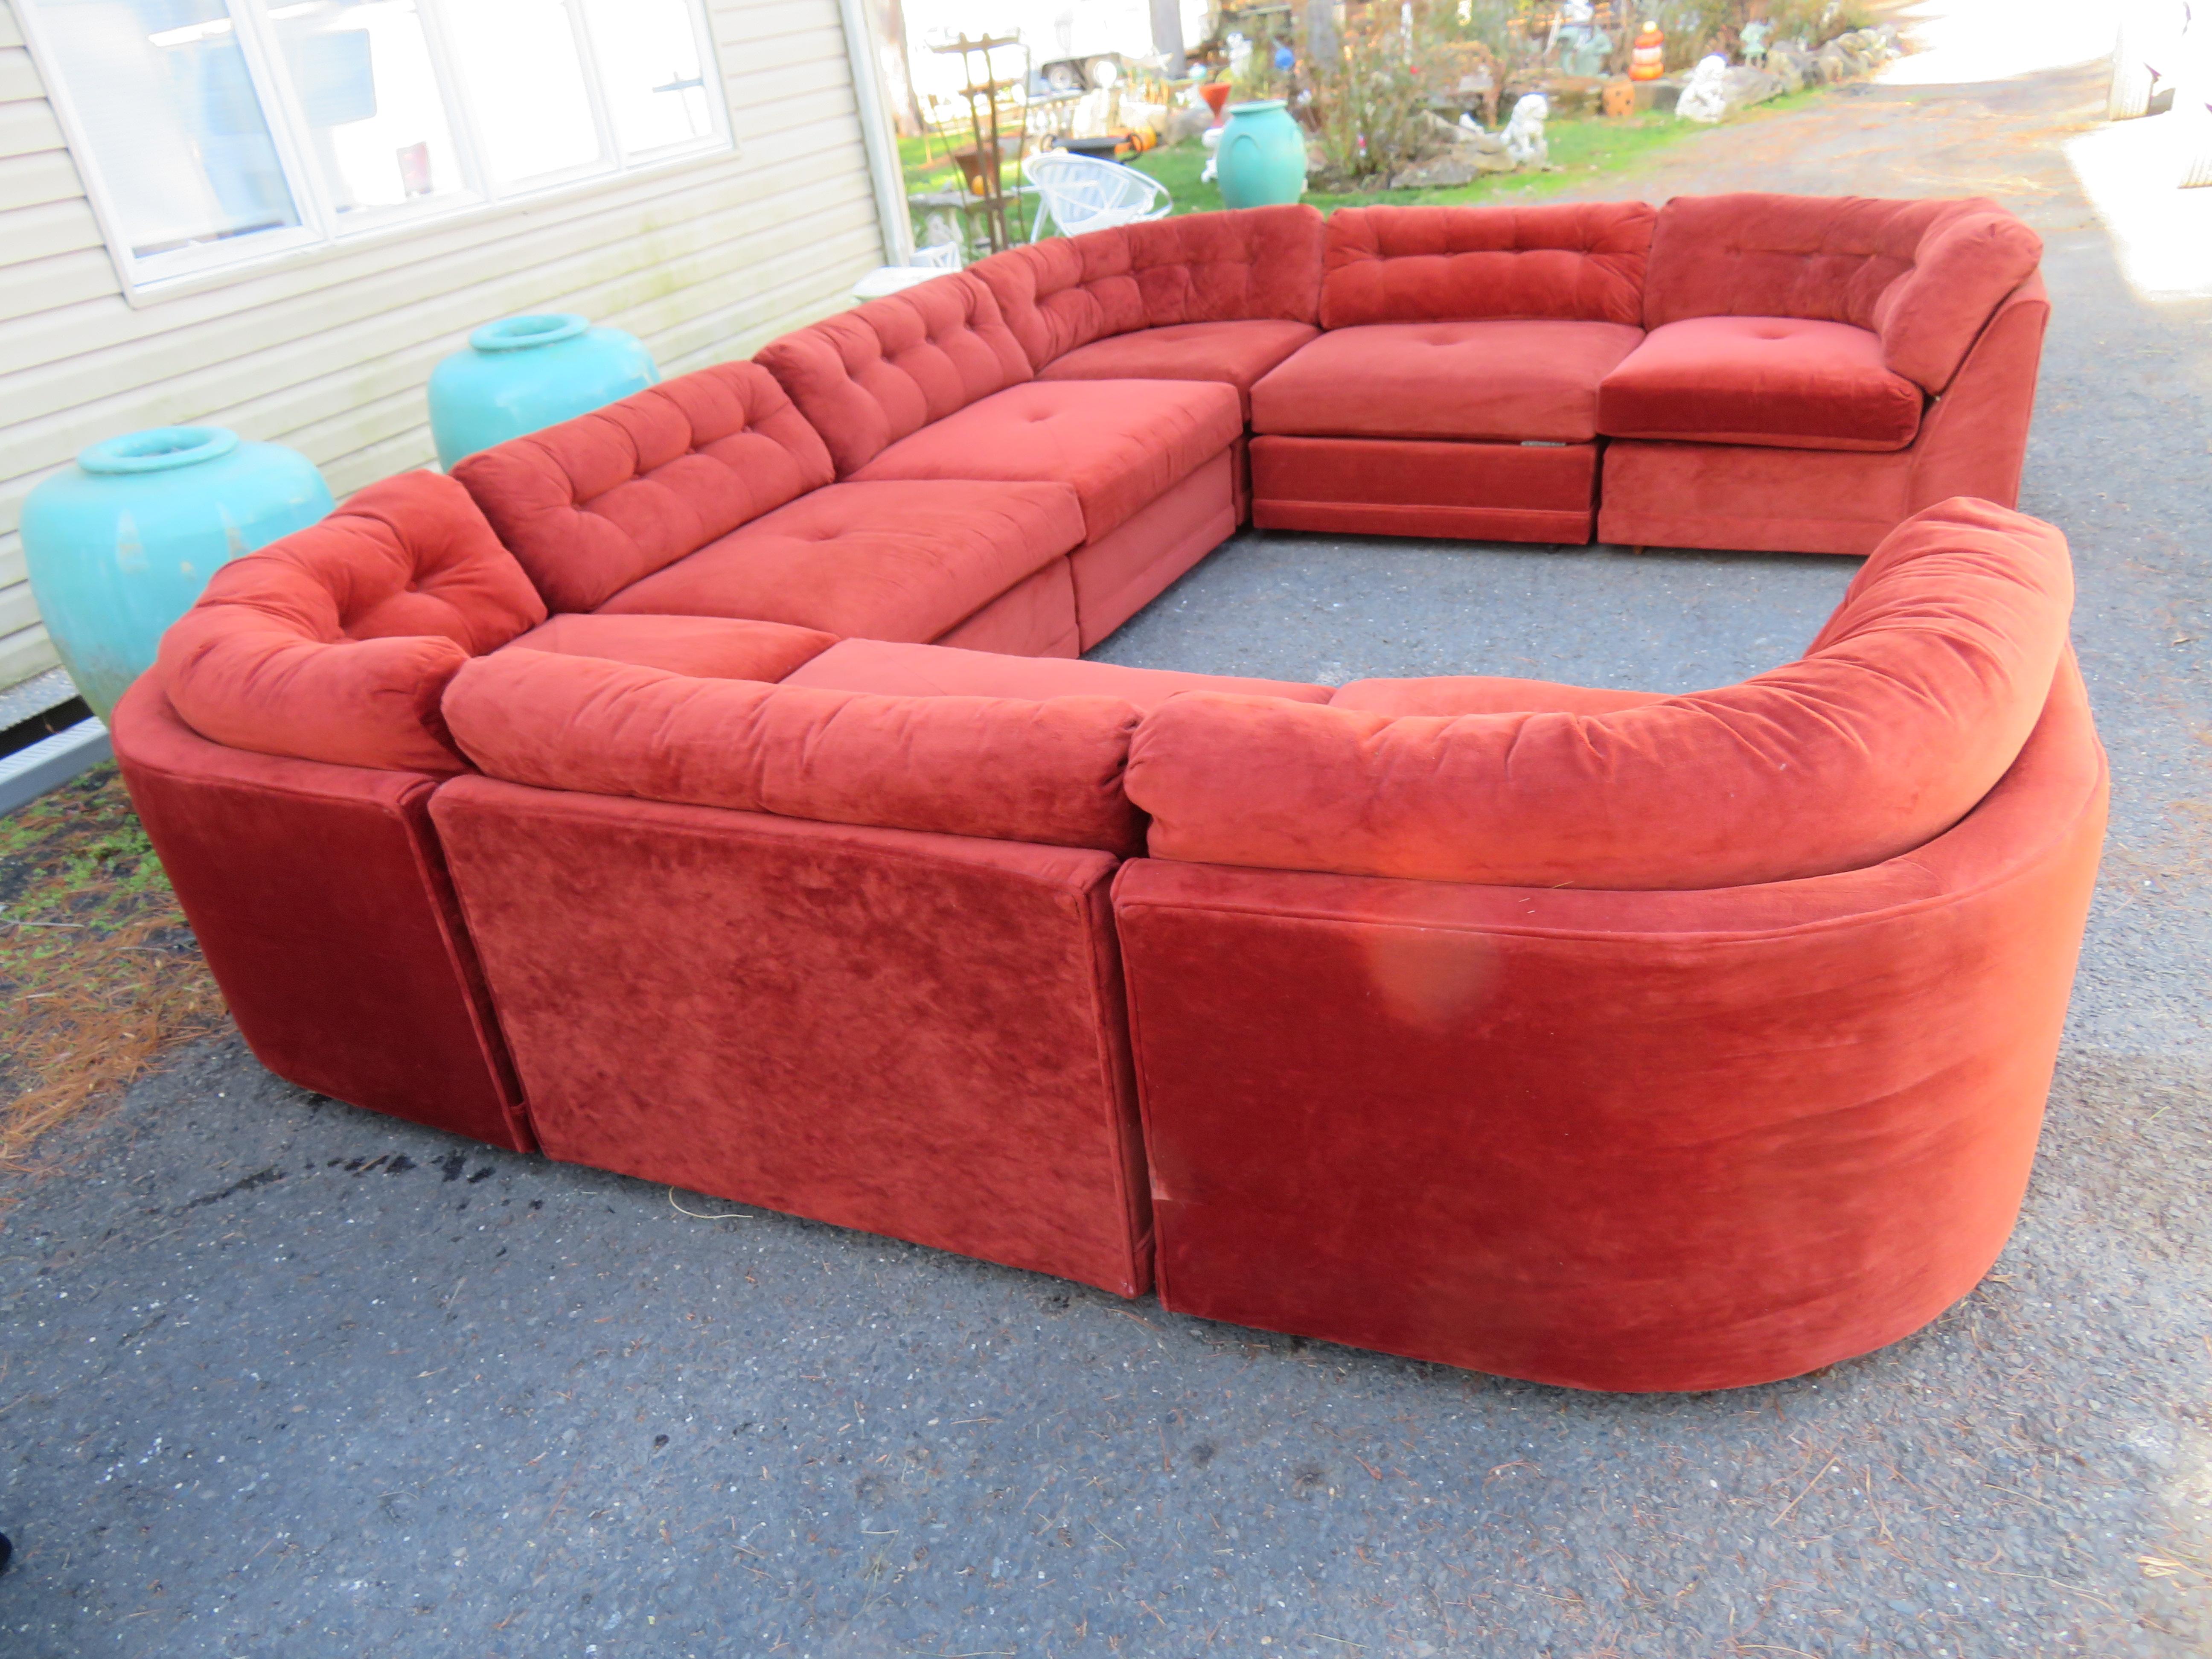 Magnificent Milo Baughman style 8 piece curved orange velveteen sectional sofa. Four corner pieces and four center pieces. This is one of those rare vintage sofa sectionals in very nice original condition and can be used as is. The cushions are